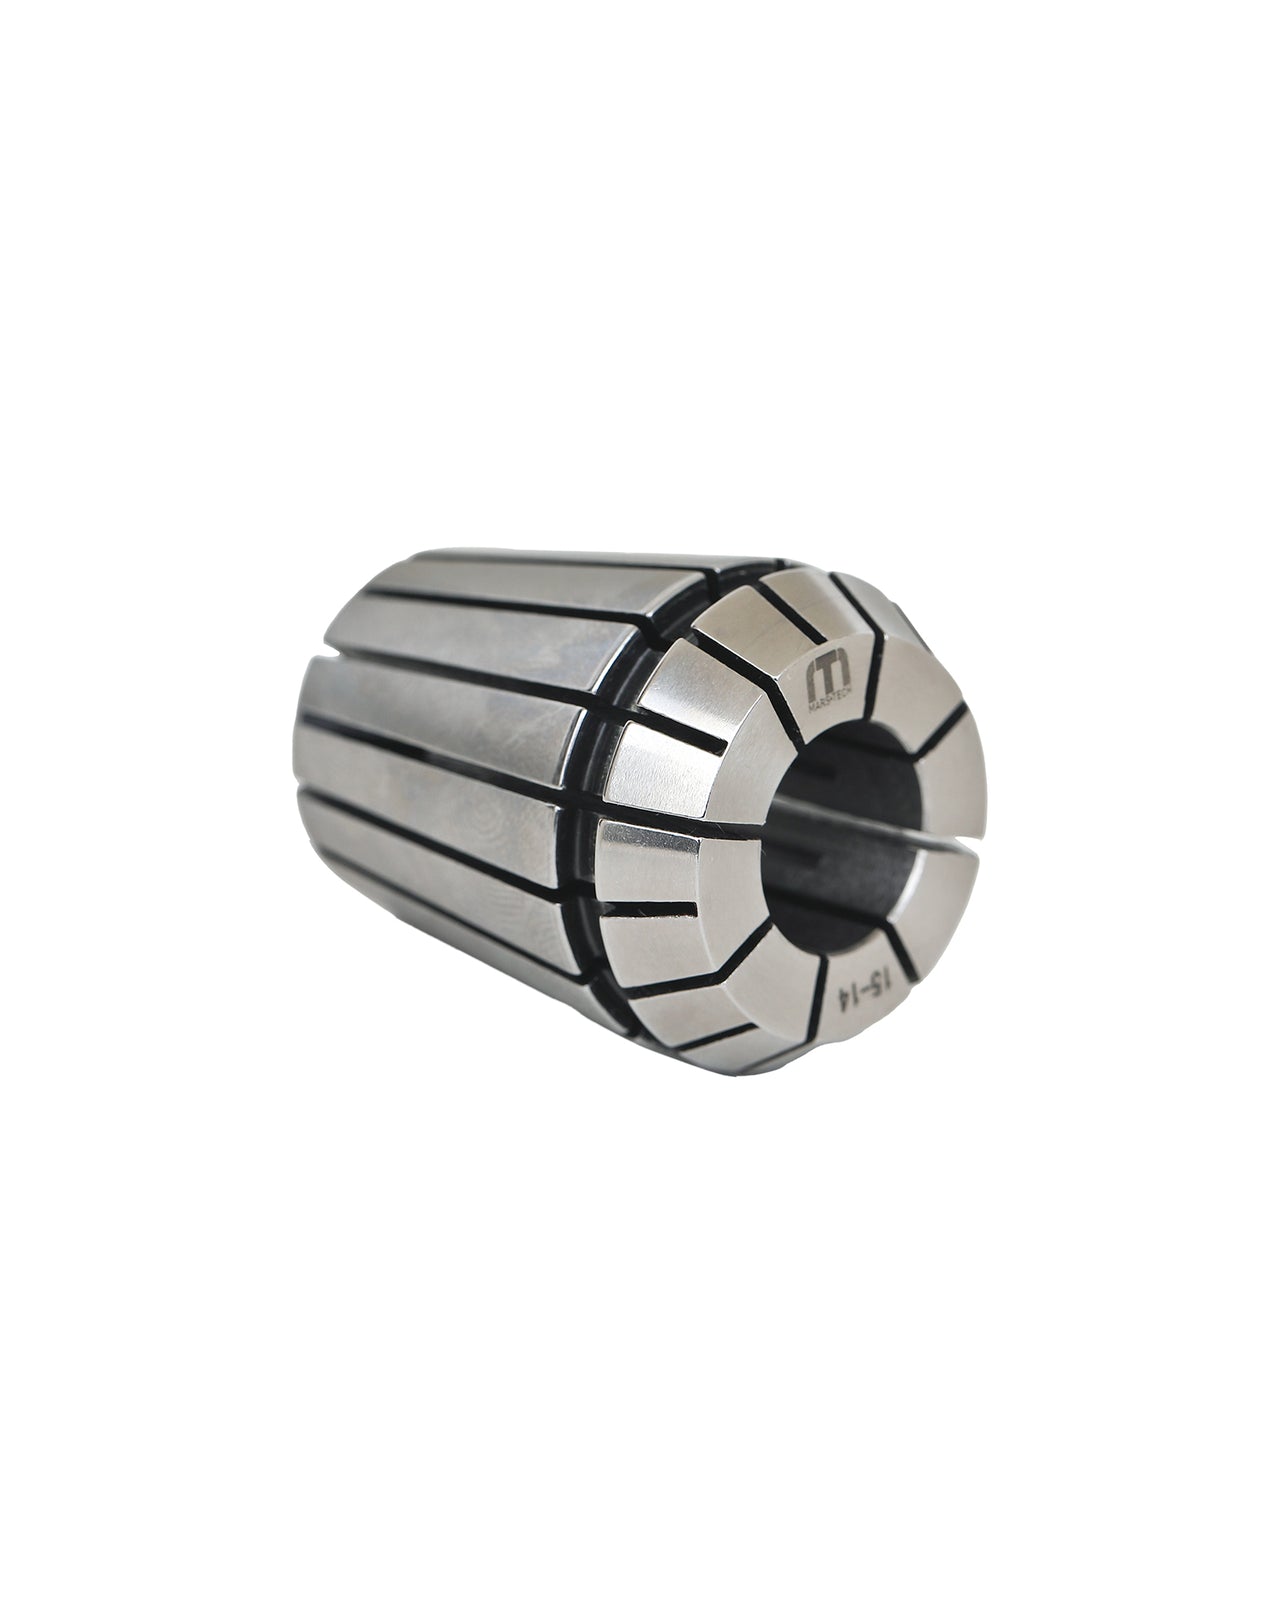 ER32 Collet Ultra high precision 0.005 AAA quality